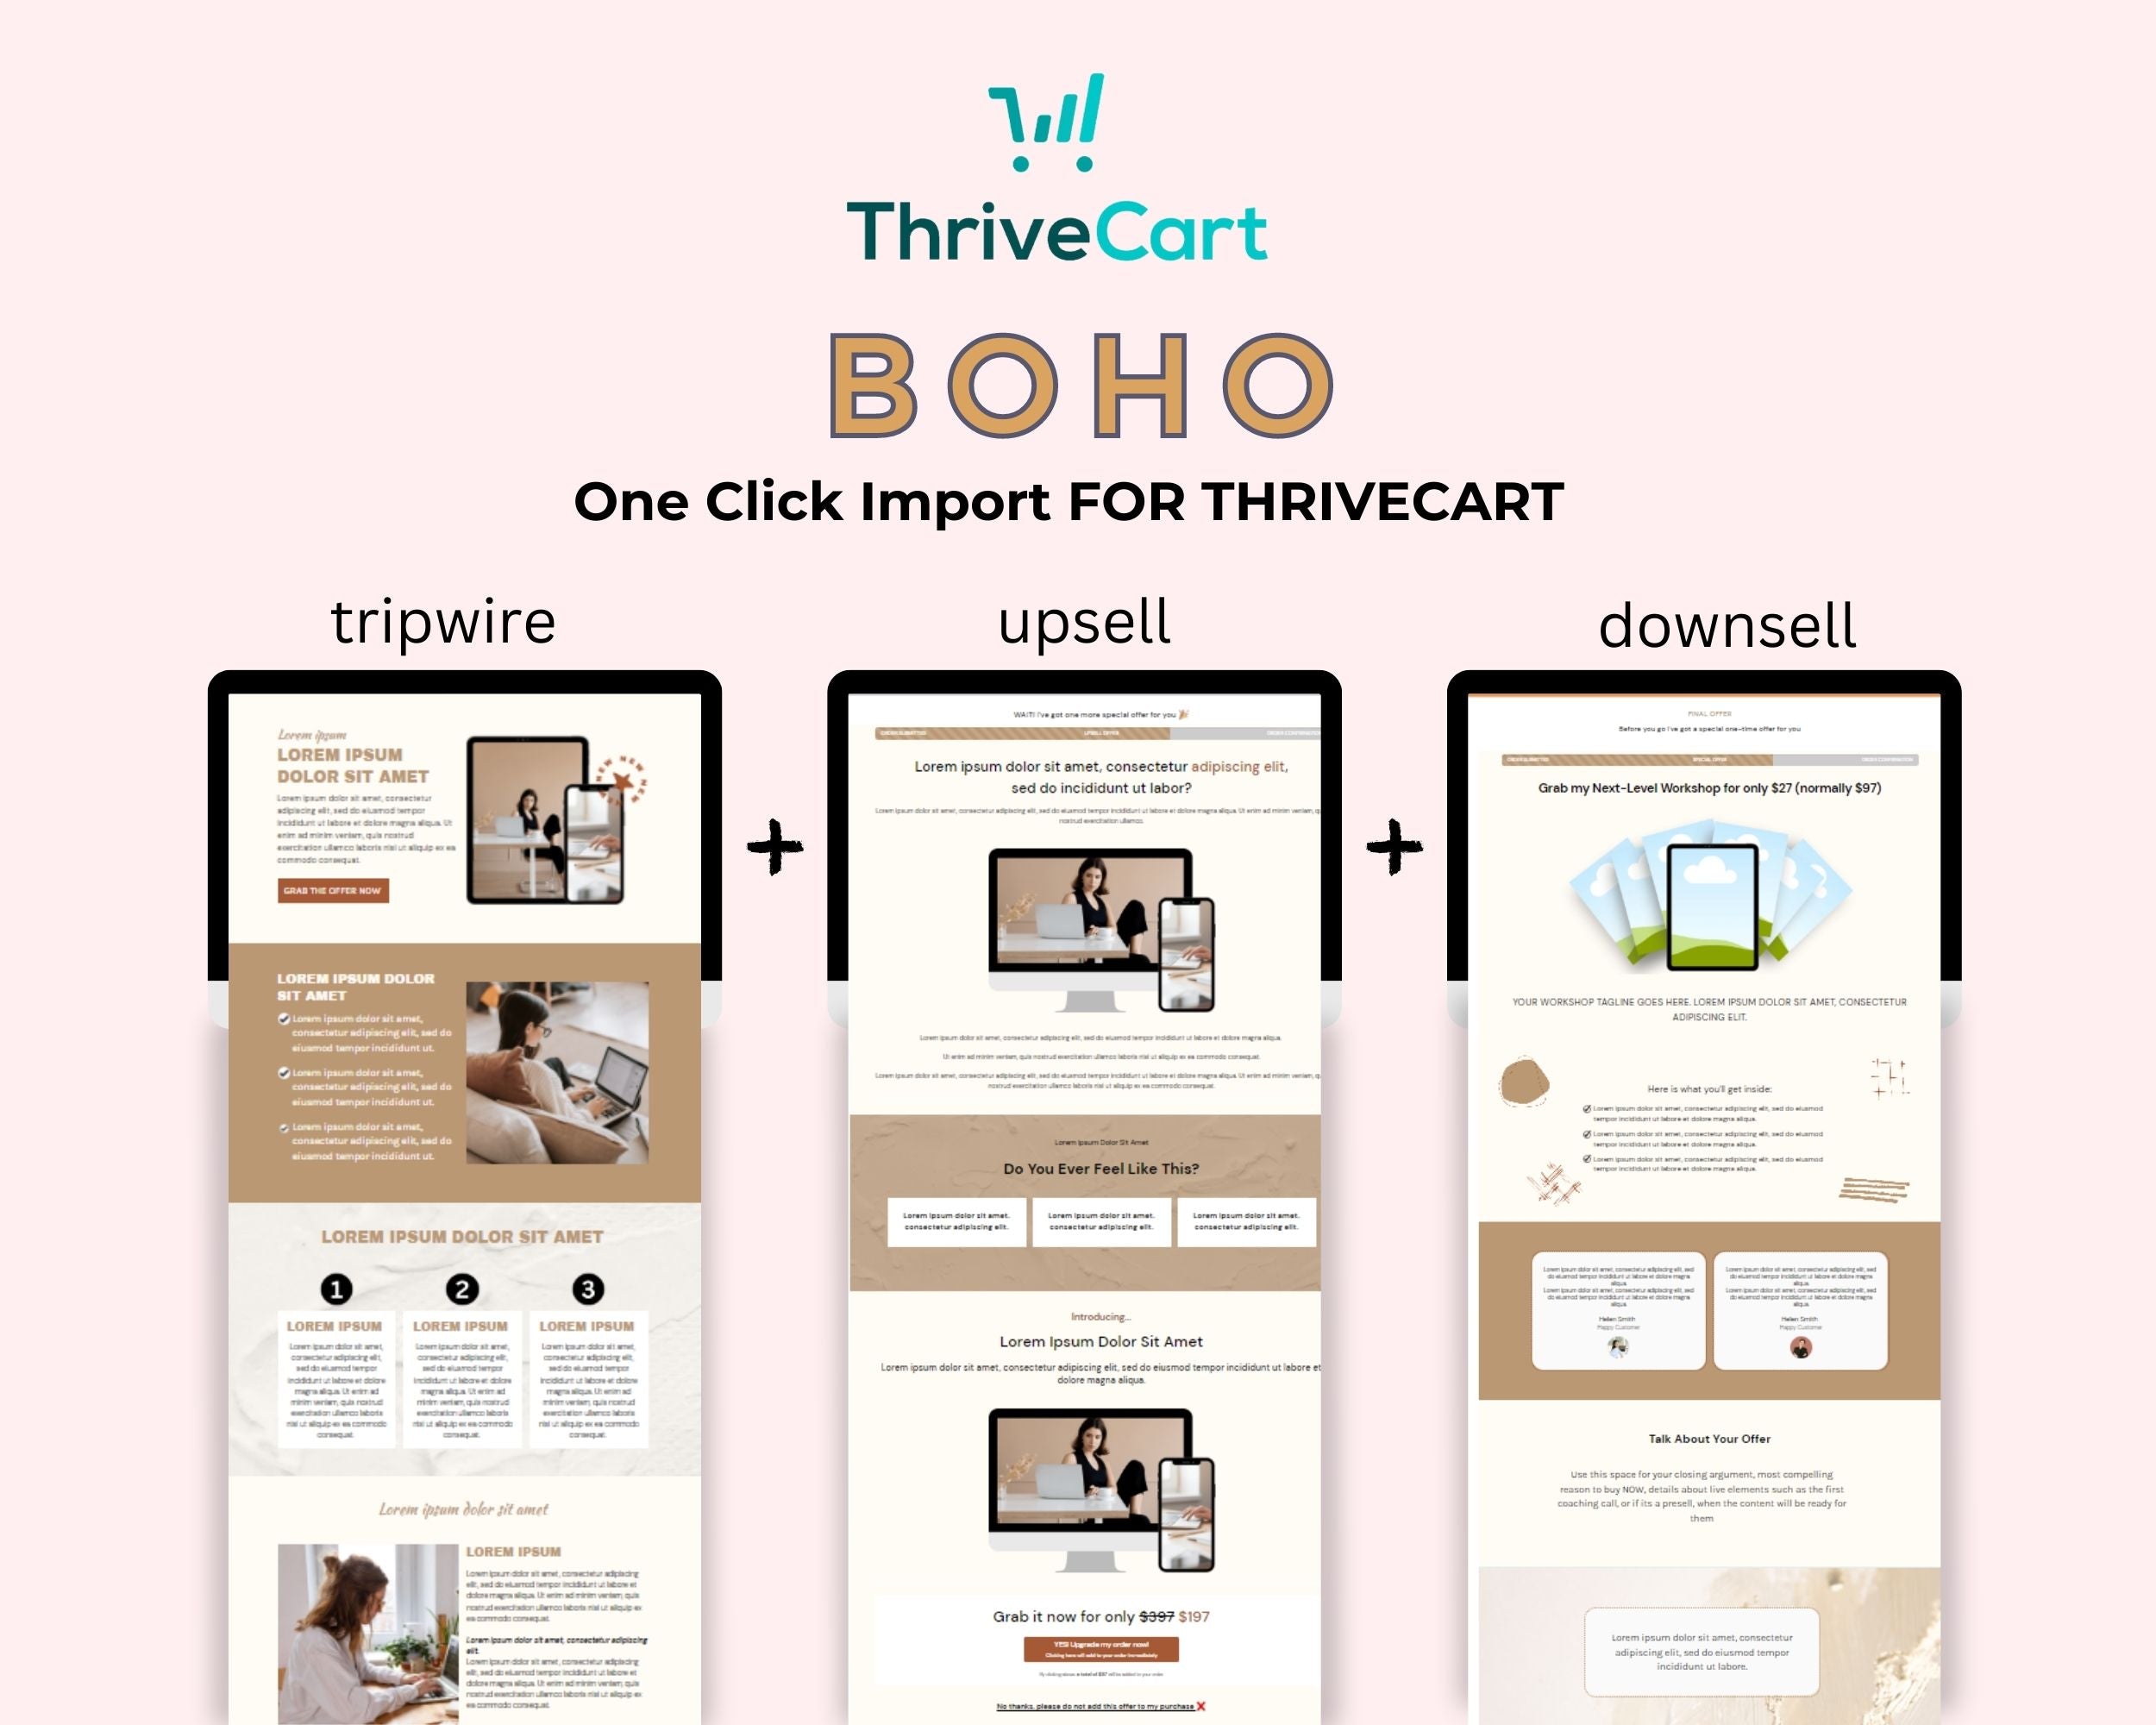 Boho ThriveCart 4-Page Sales Funnel Template